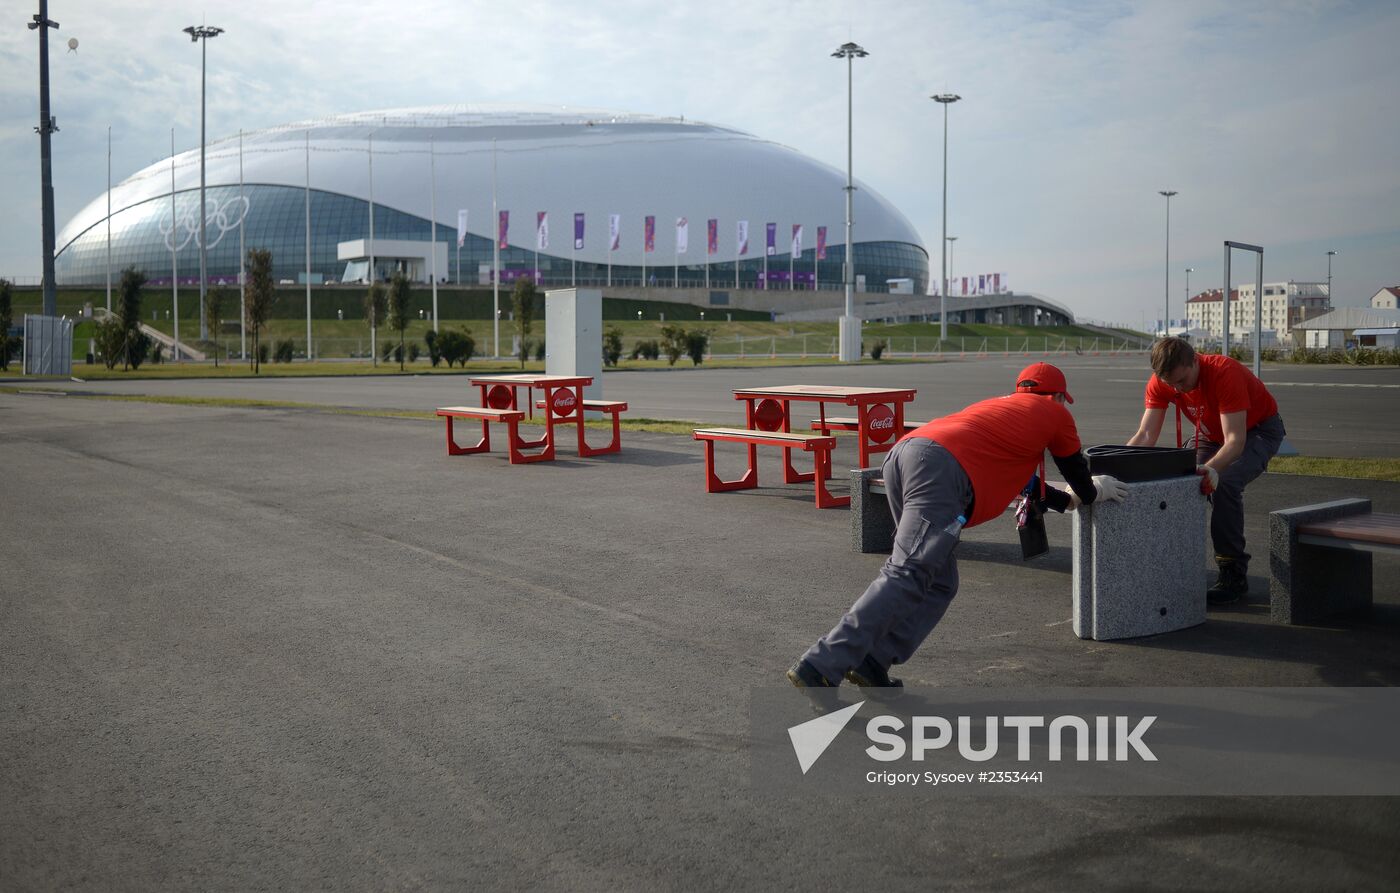 Sochi readies to welcome Winter Olympics